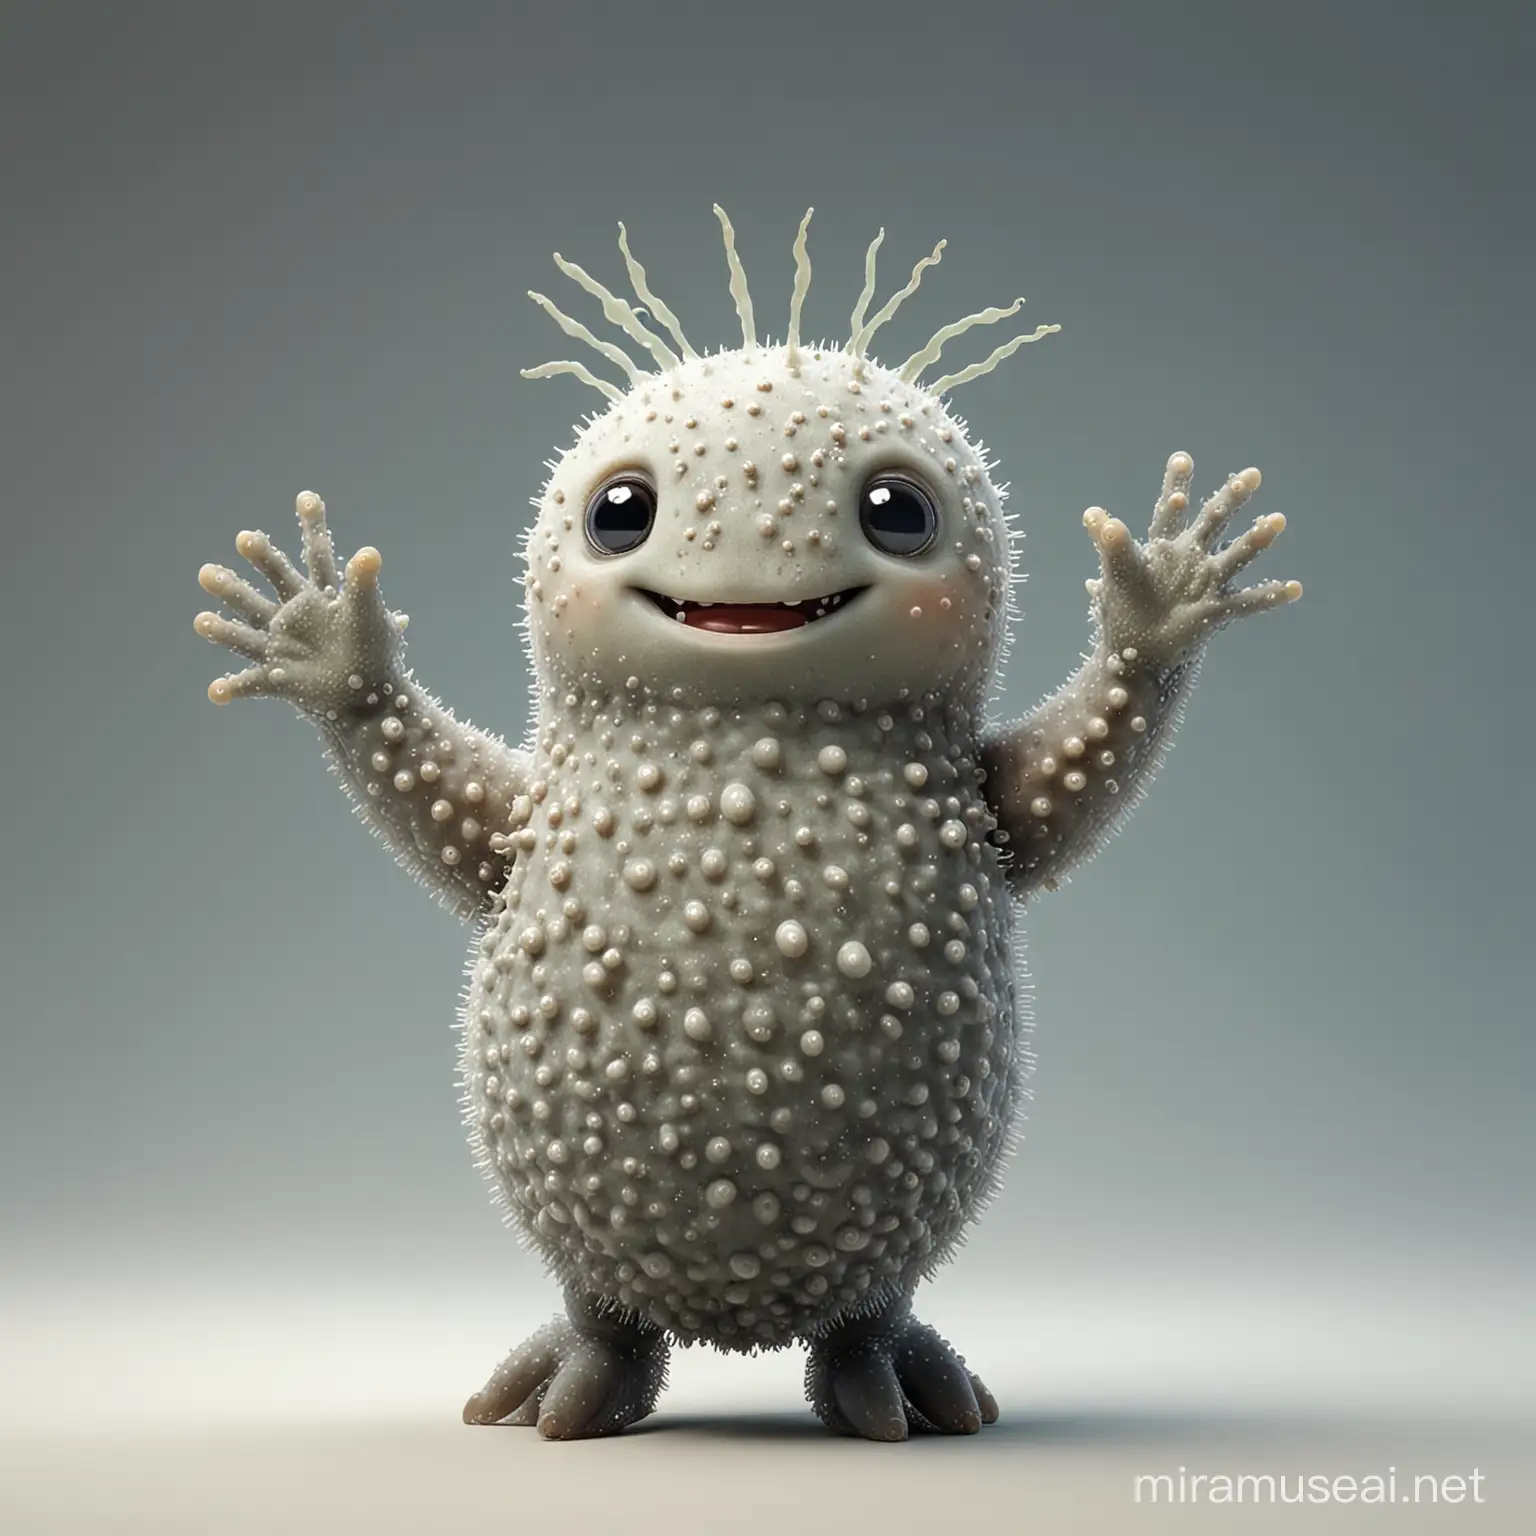 cute humanoid sea cucumber with arms and hands facing forward